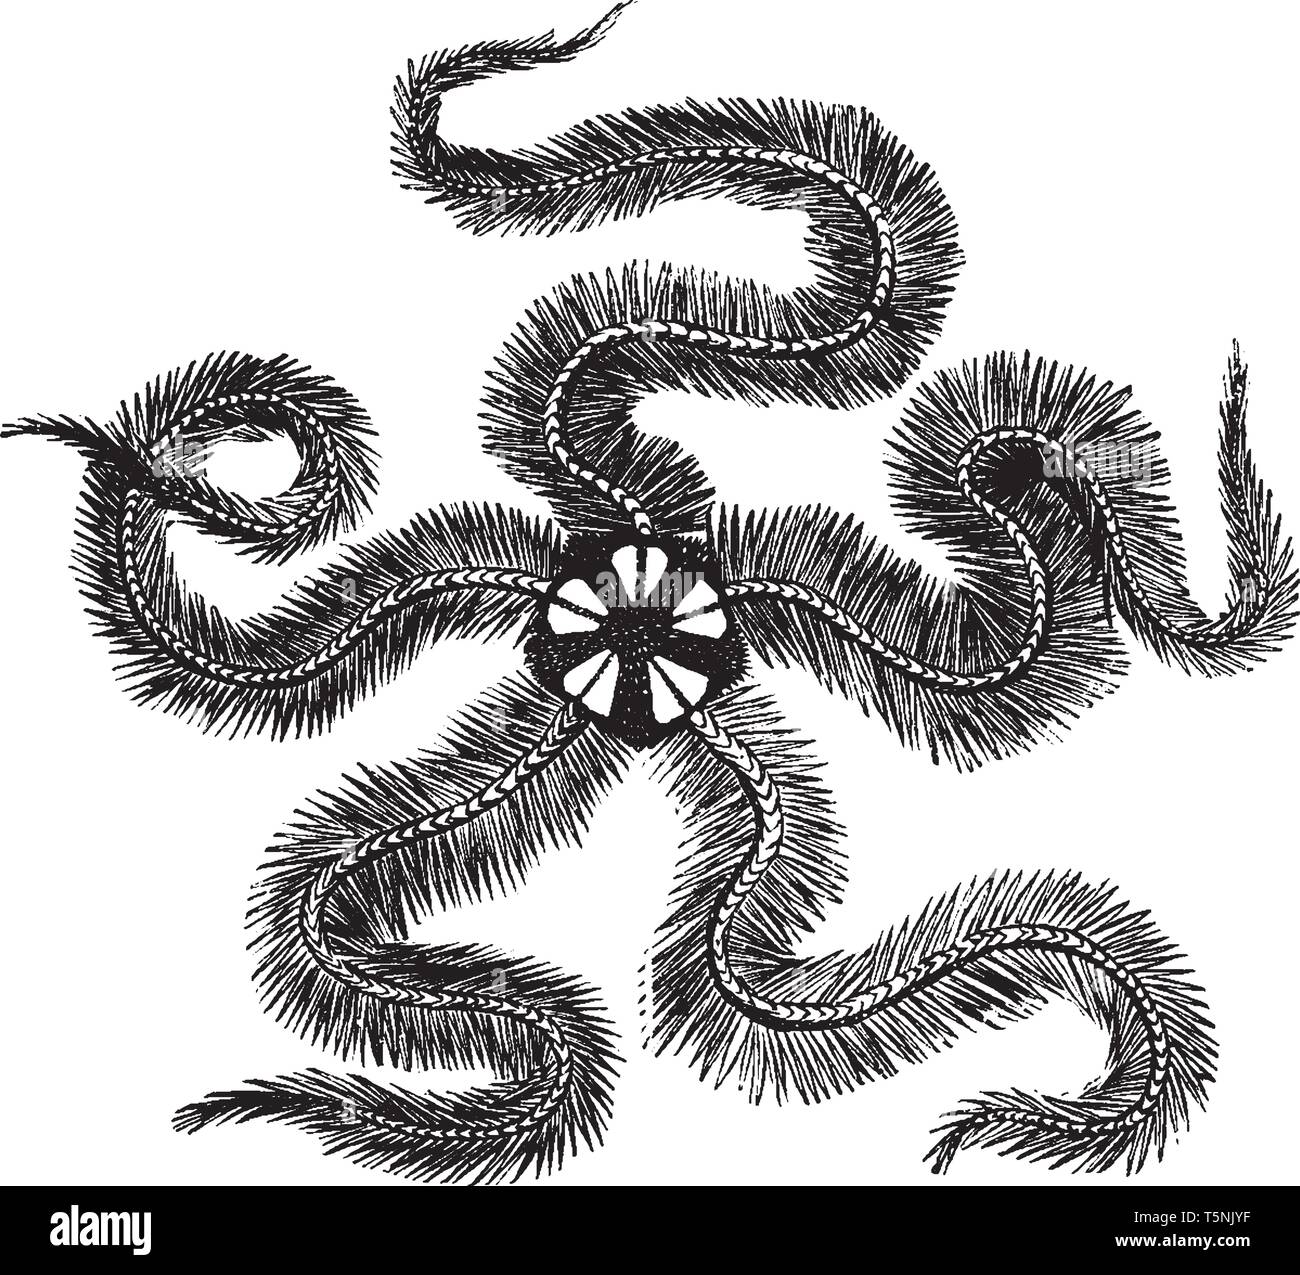 Common brittle star among the several species of Brittle Star found in the British seas is the Common Brittle Star, vintage line drawing or engraving  Stock Vector